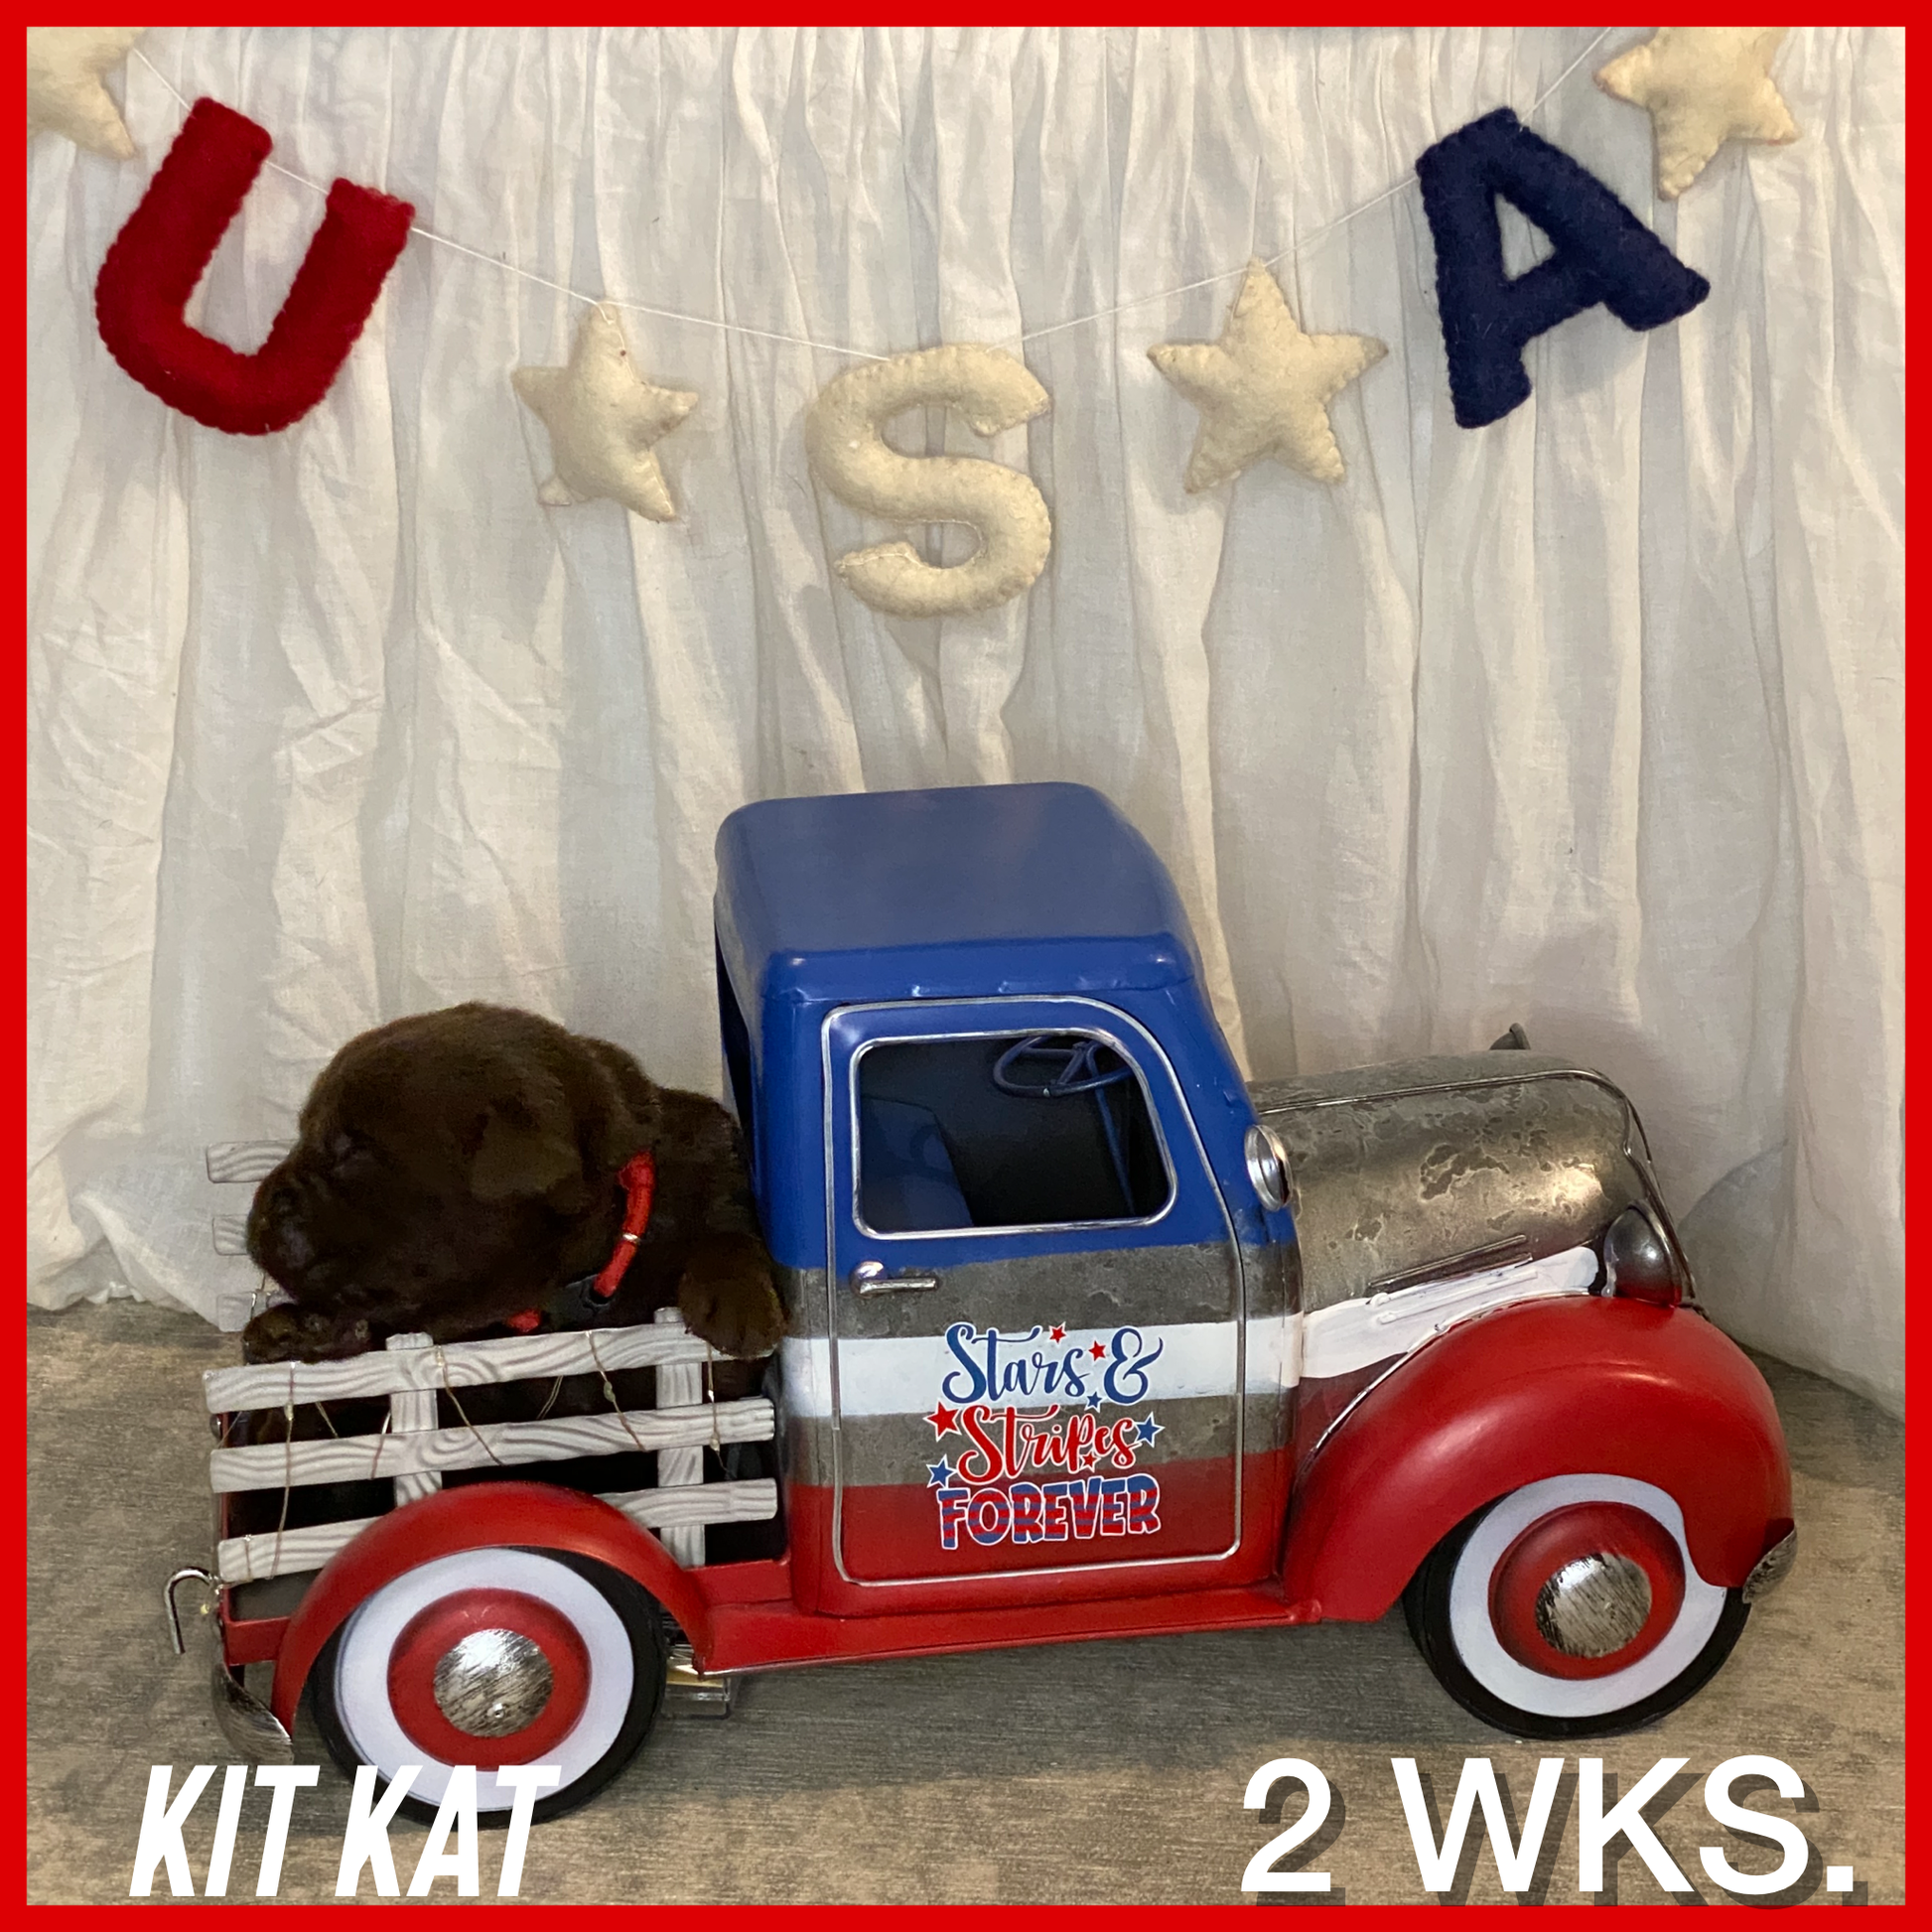 Chocolate Labrador retriever Puppy Kit Kat in a toy truck